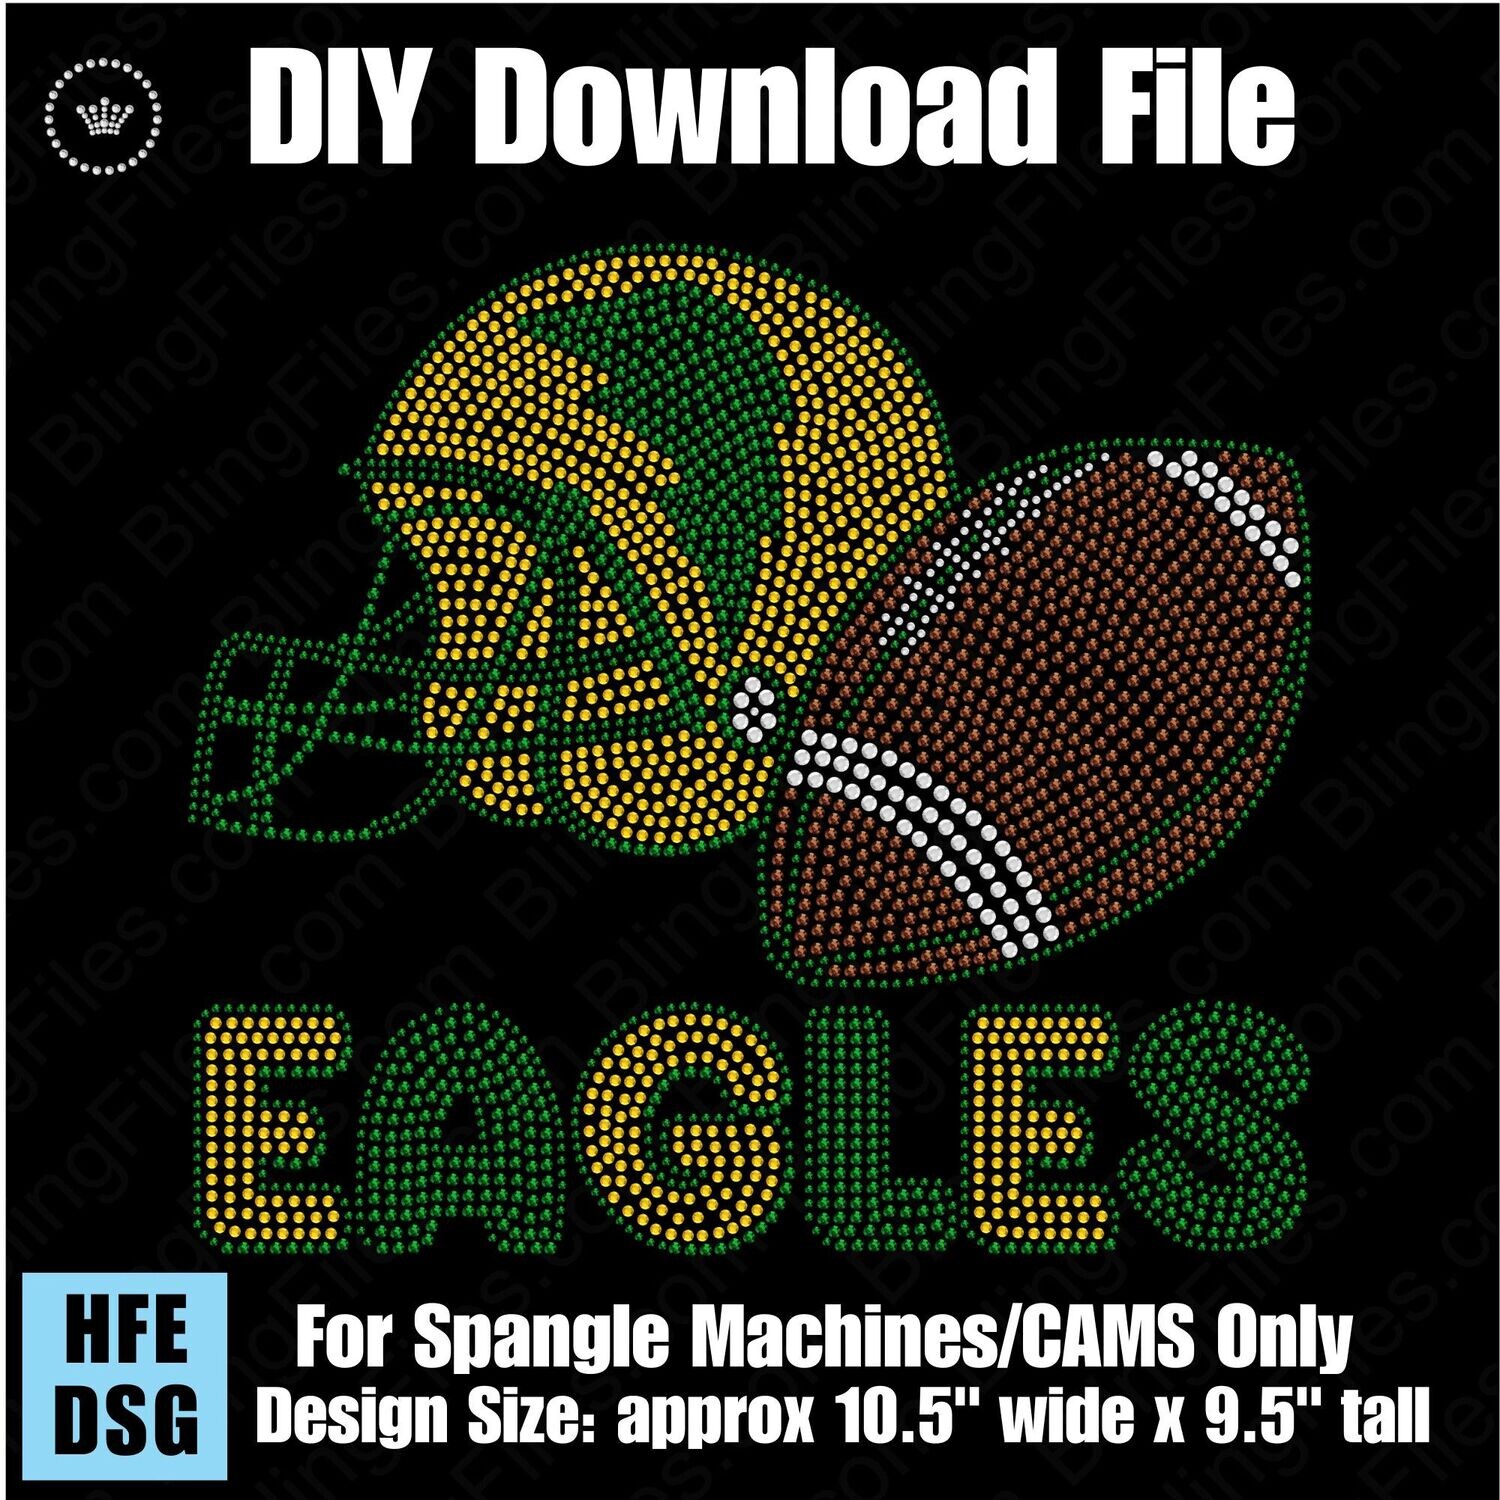 Helmet and Football with Eagles Word Mascot Download File - CAMS/ProSpangle